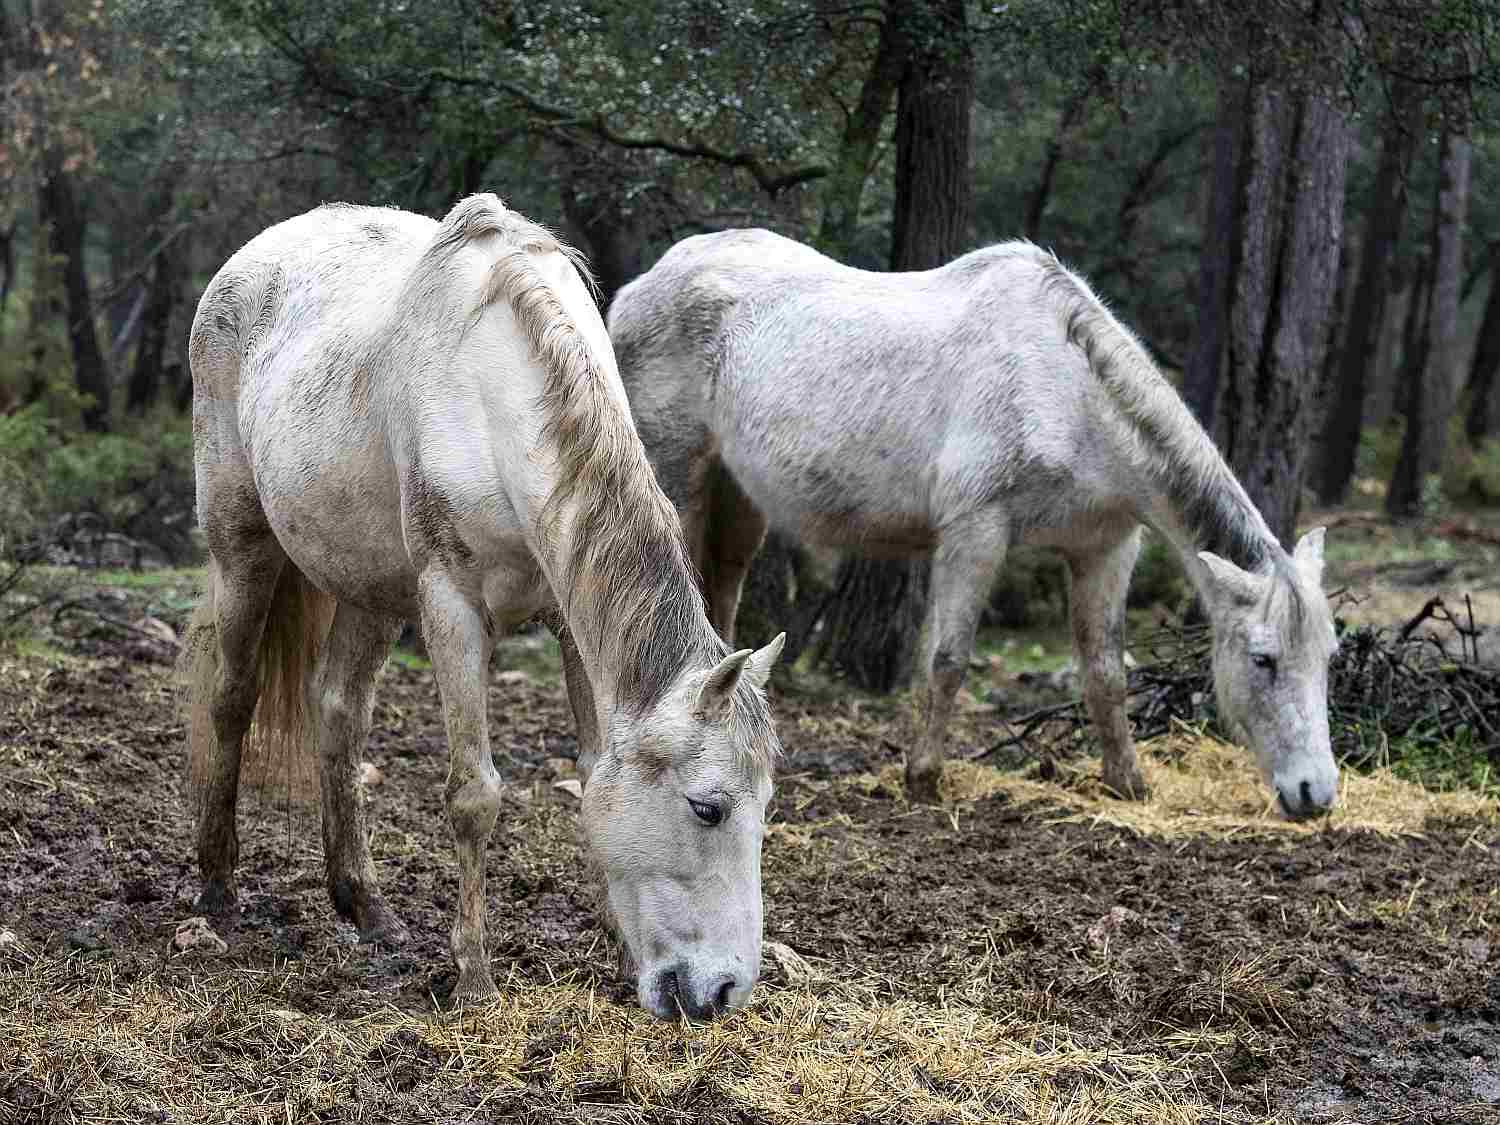 Two older horses with hollow backs.